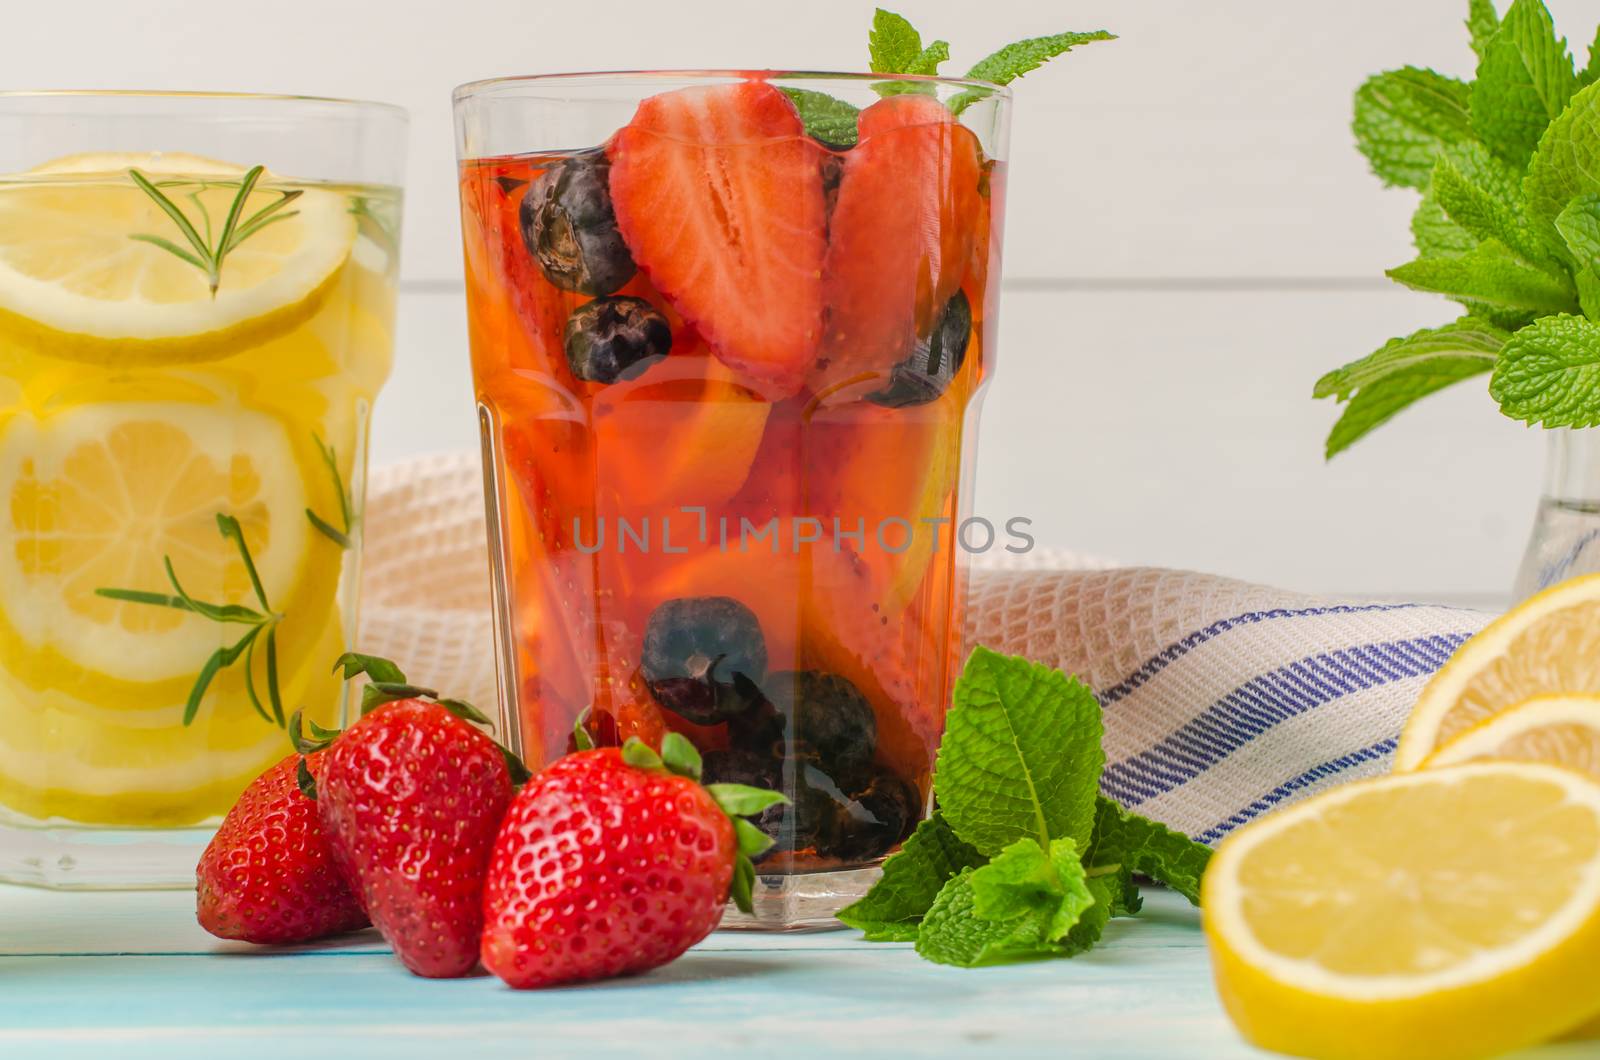 Detox fruit infused flavored water. Refreshing summer homemade cocktail